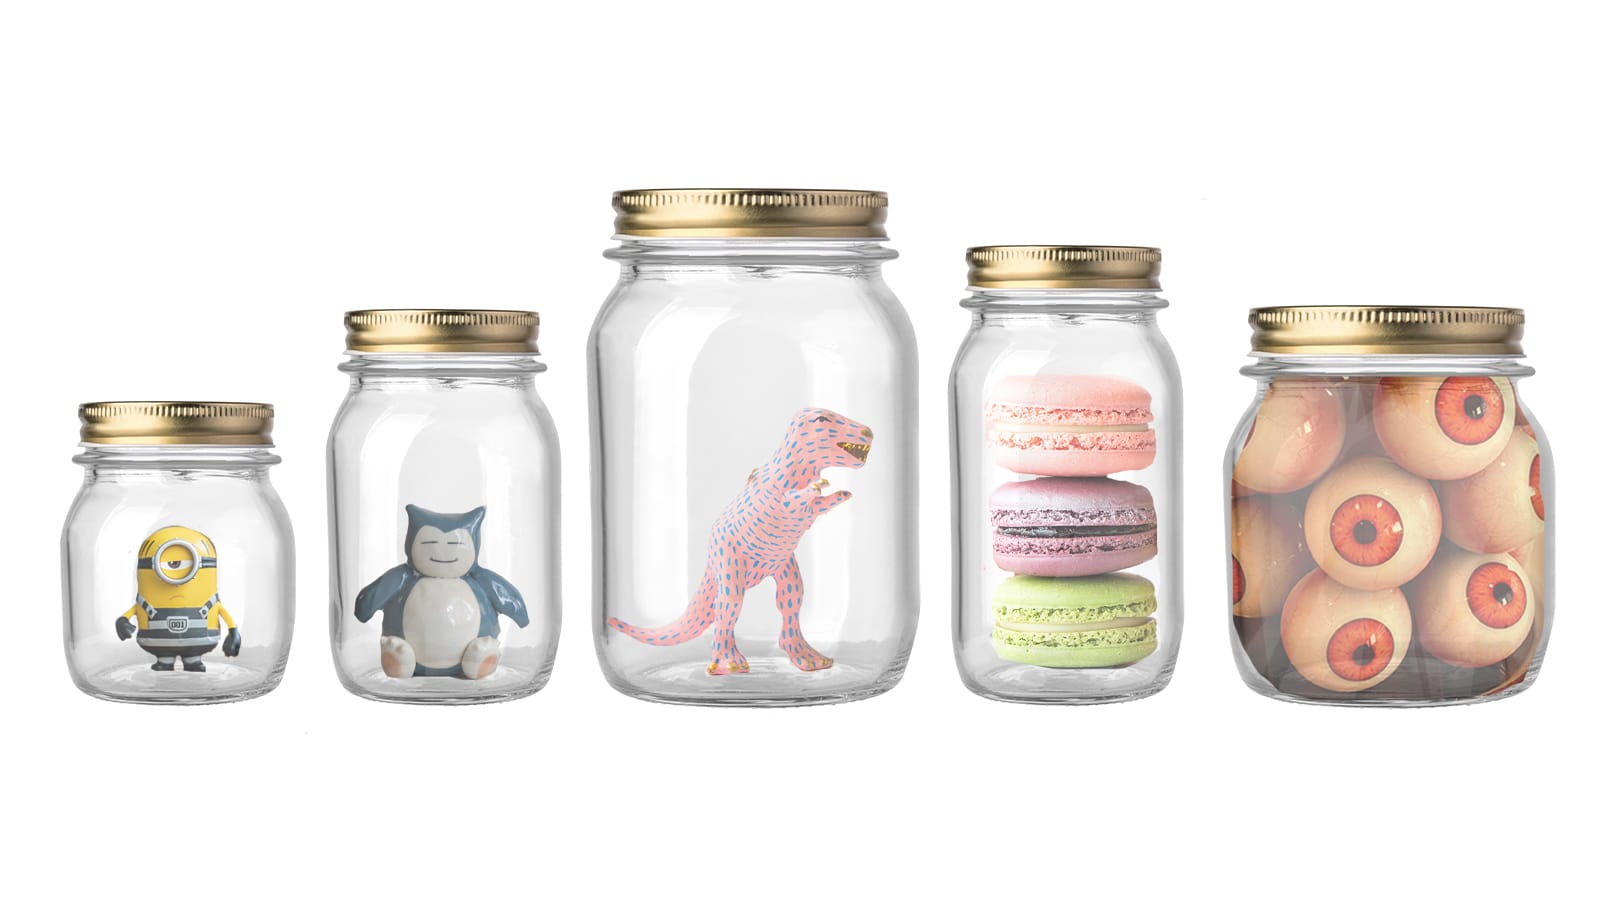 A row of glass jars with small toys inside of them, including a pink dinosaur and a minion